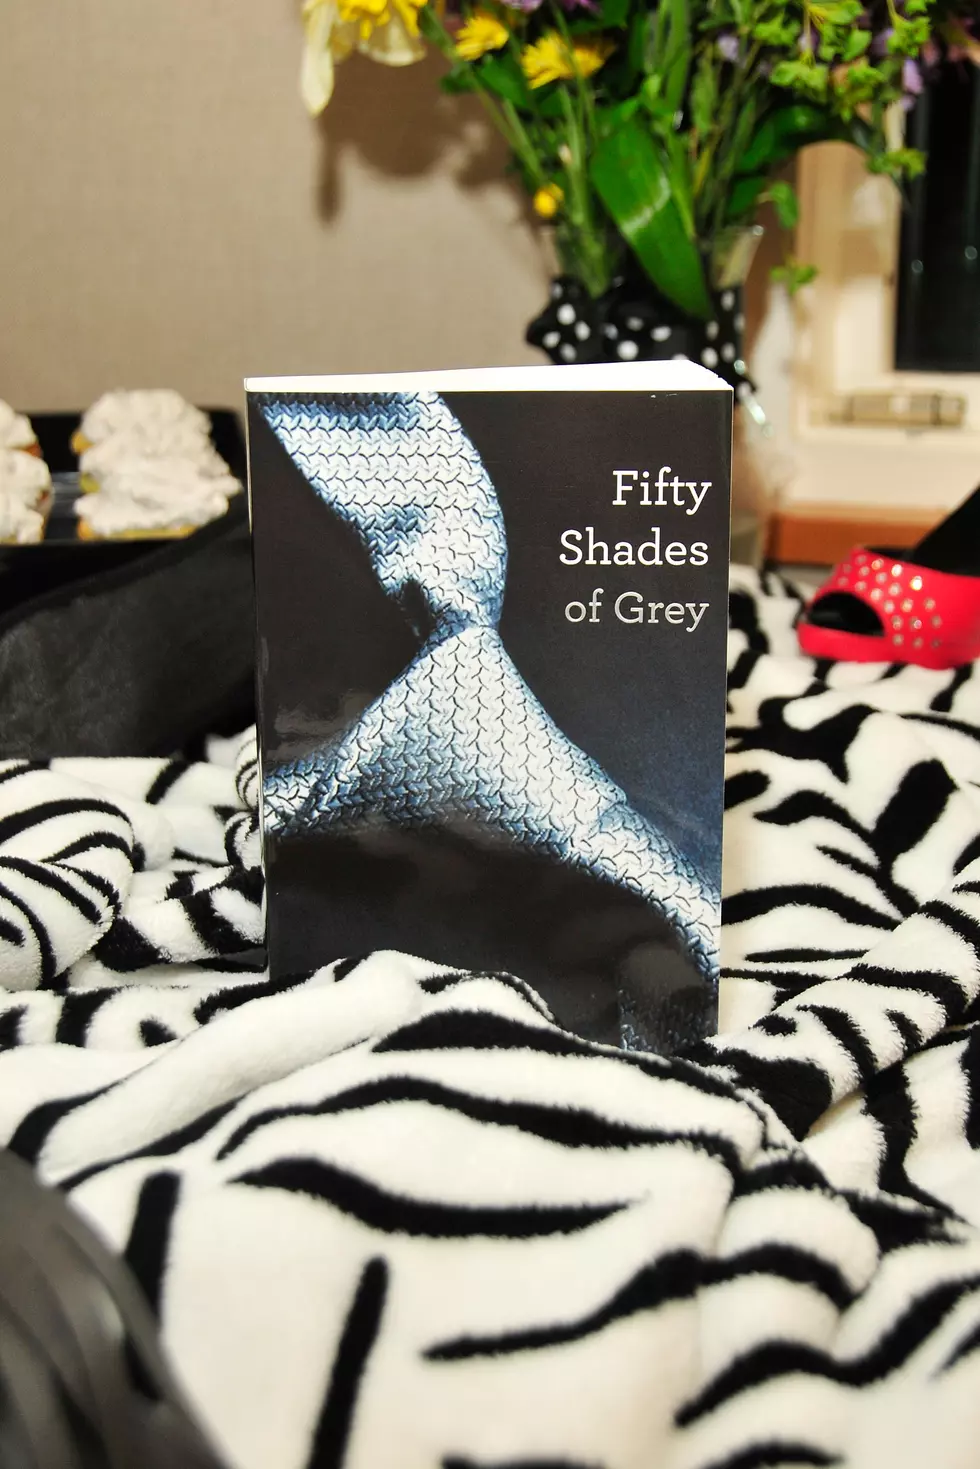 New &#8216;Fifty Shades of Grey&#8217; Book!